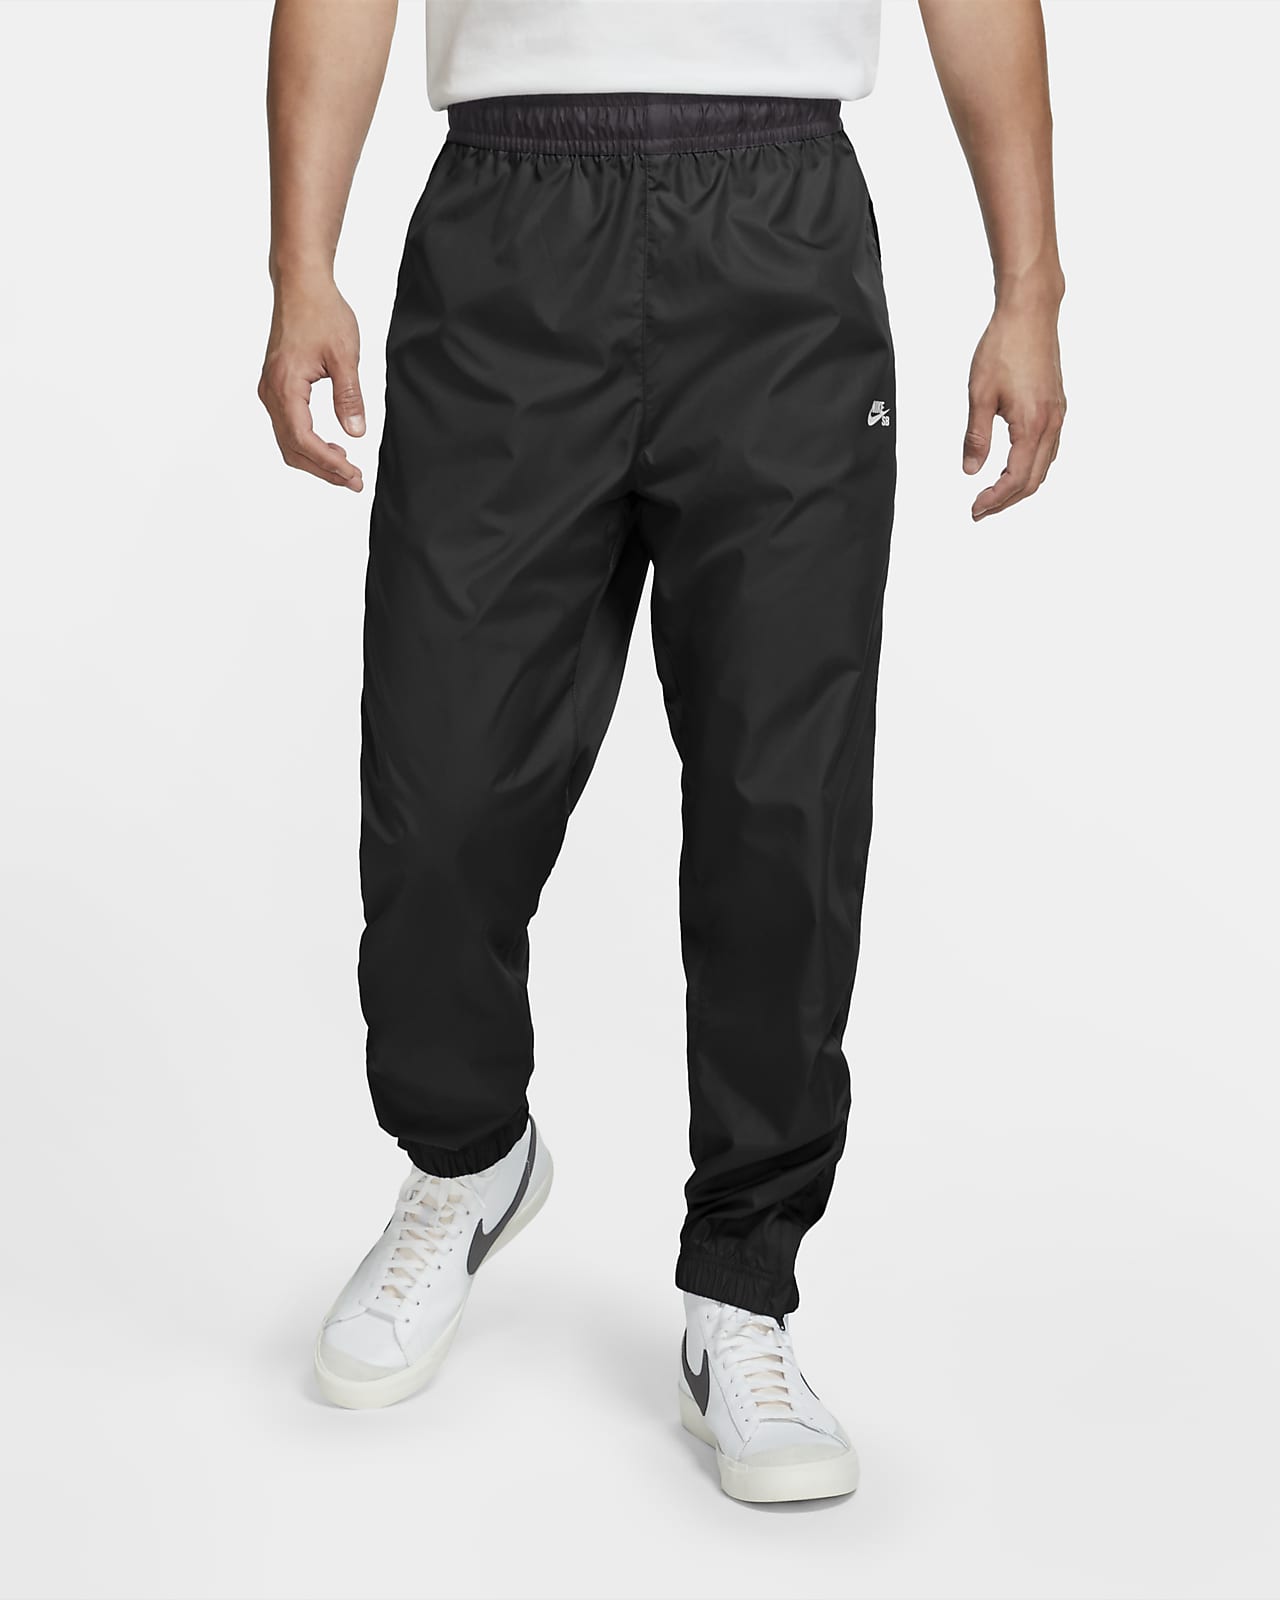 tracksuit bottoms that look like trousers